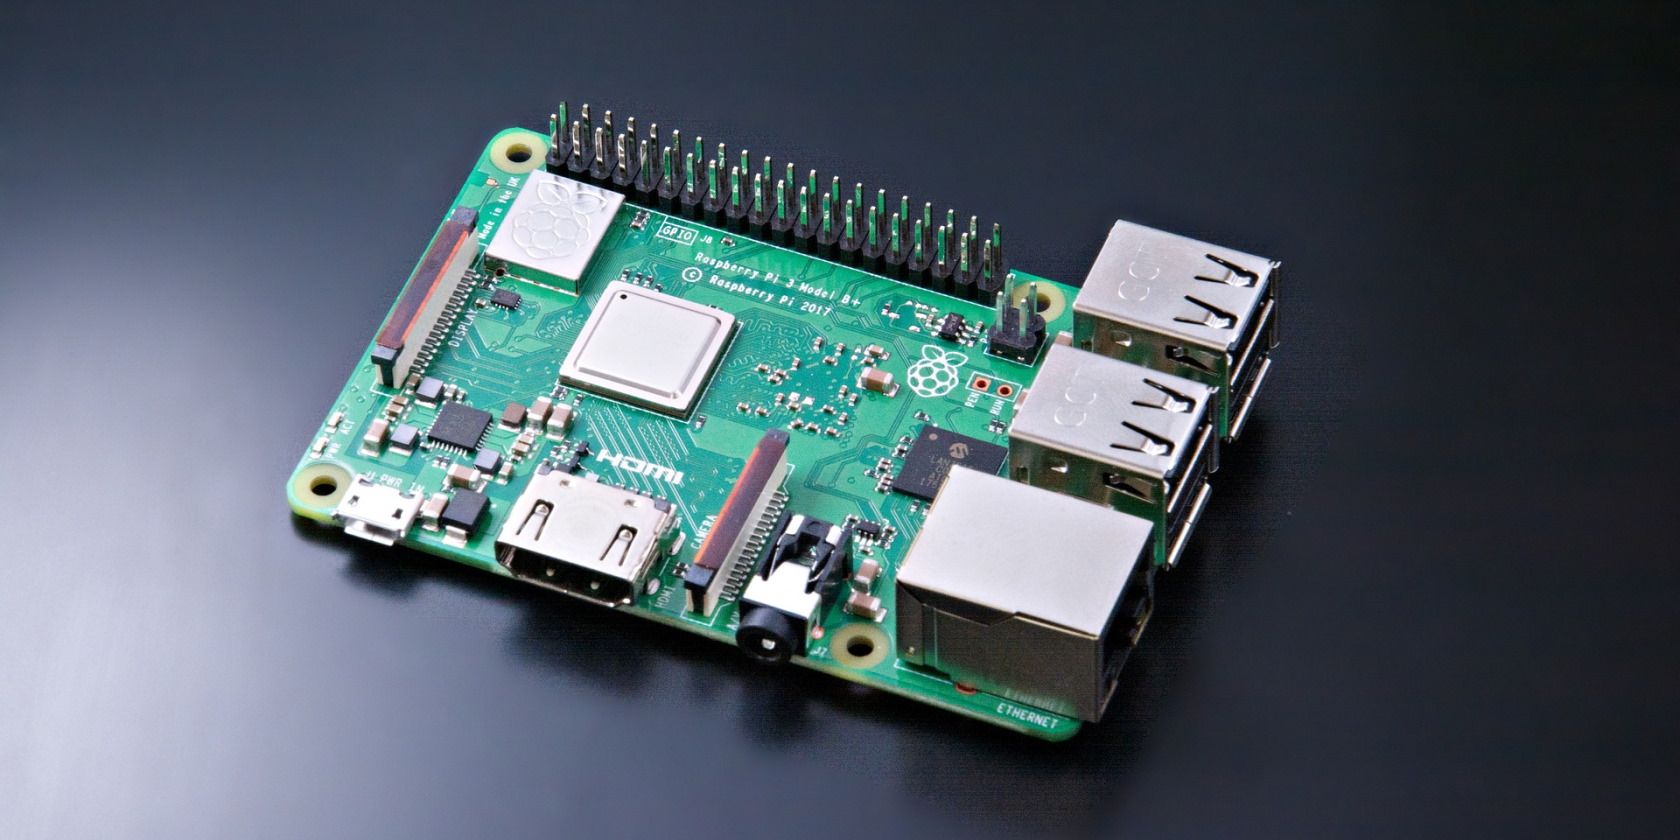 Build a Cryptocurrency Price Ticker Using a Raspberry Pi